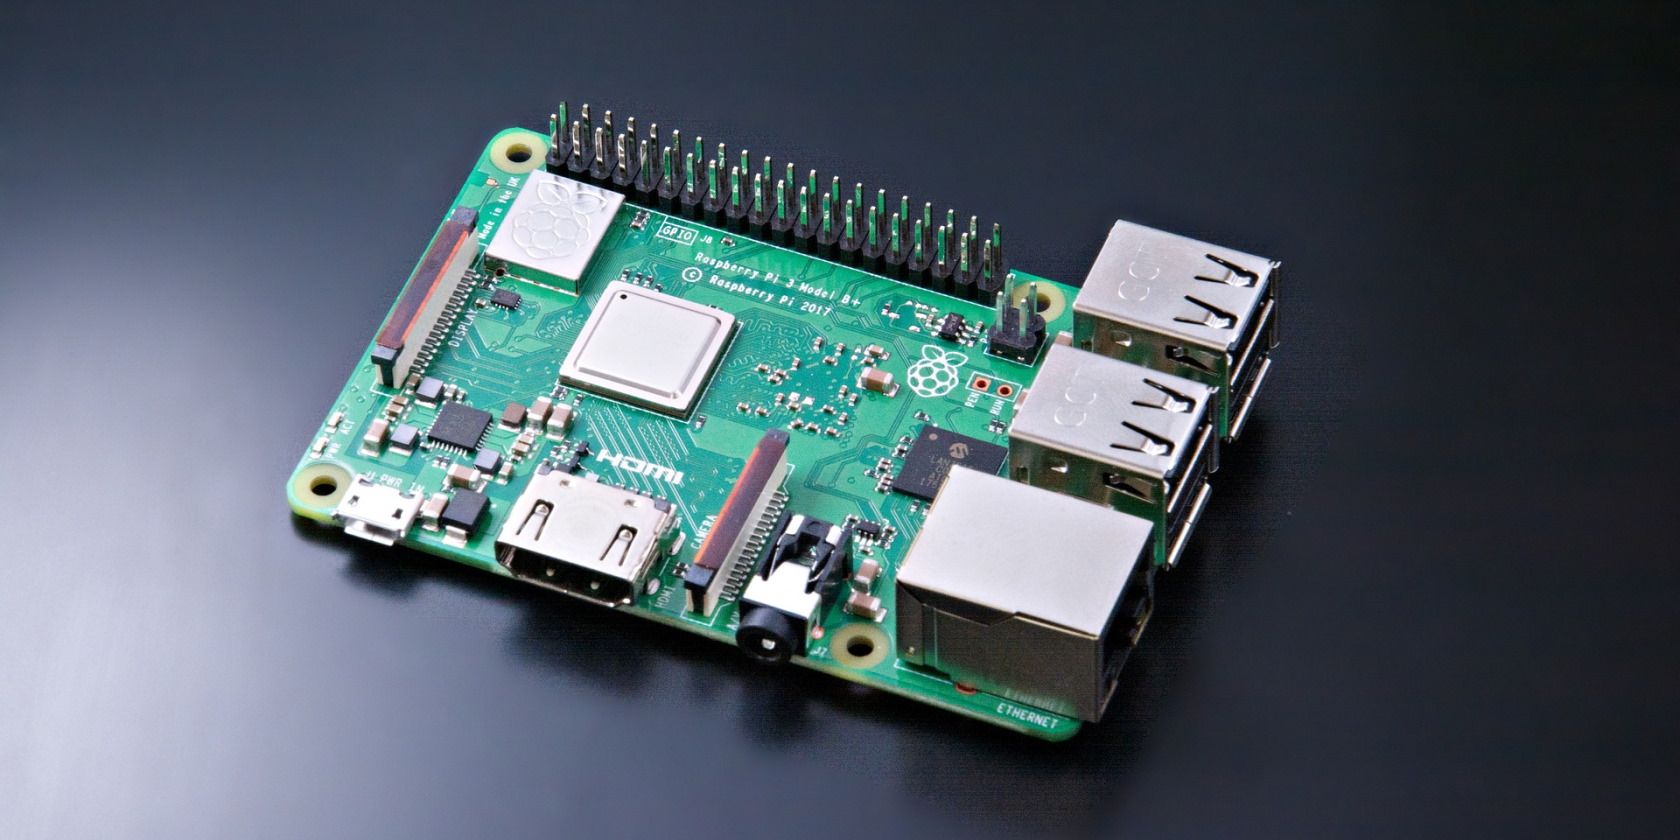 Build a Cryptocurrency Price Ticker Using a Raspberry Pi